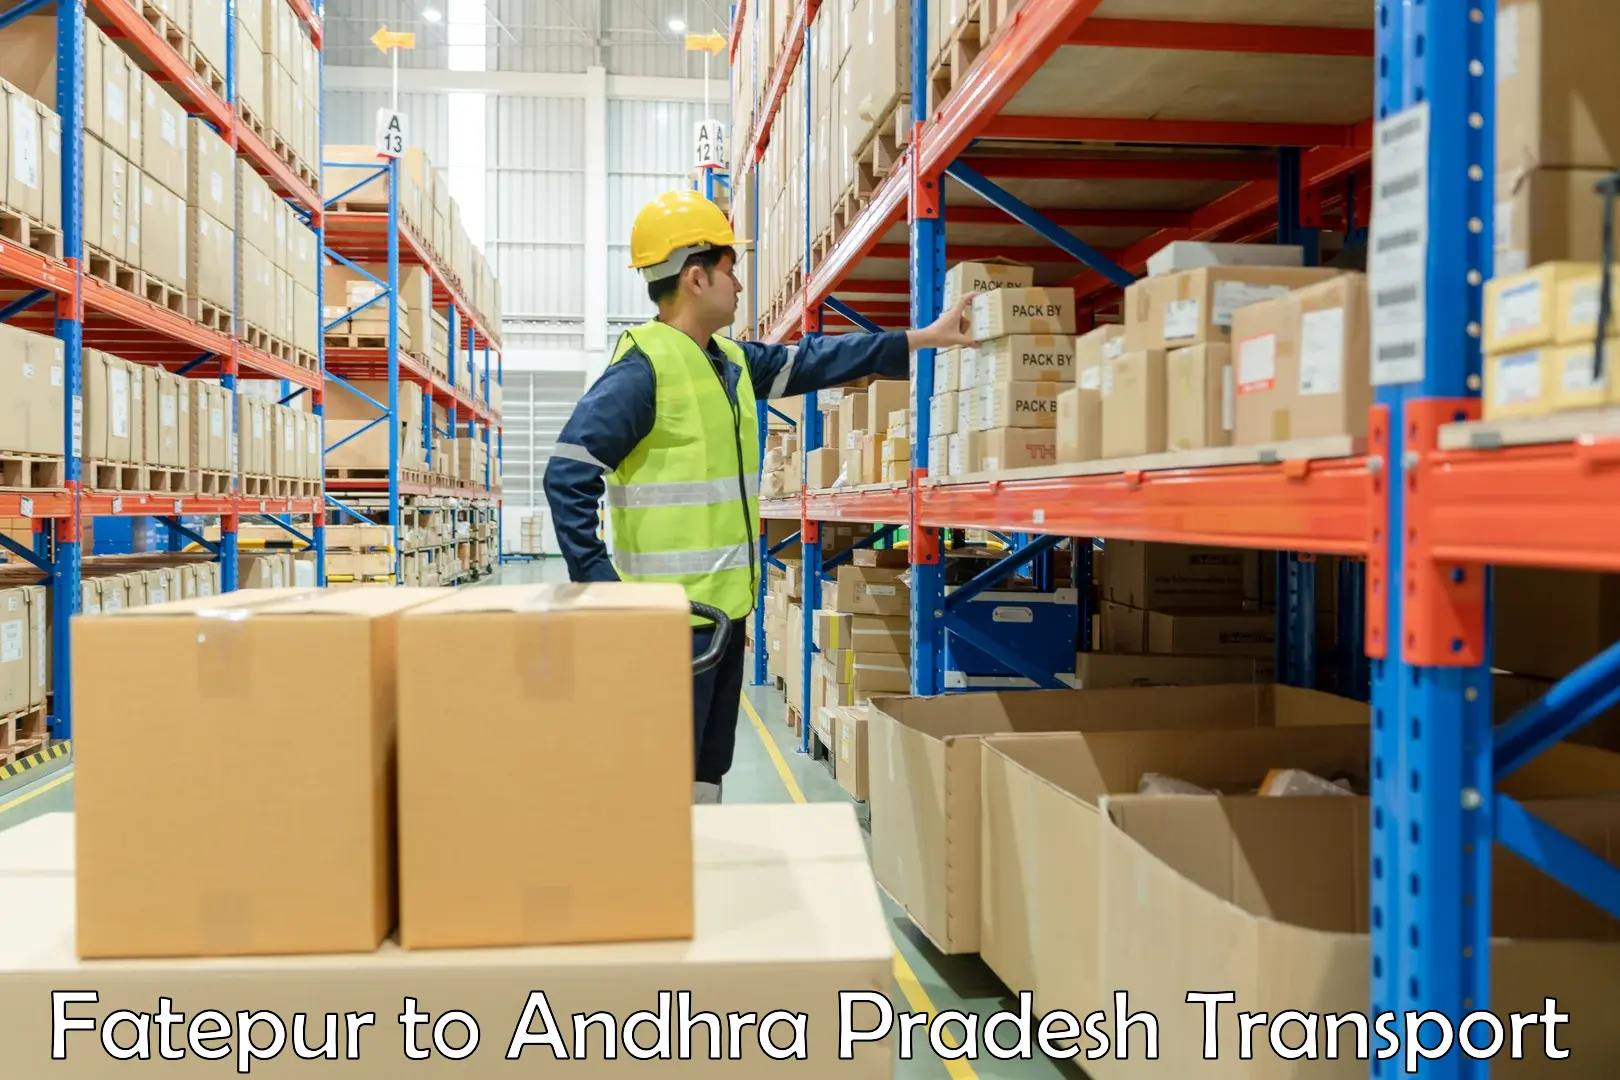 Truck transport companies in India Fatepur to Podalakur